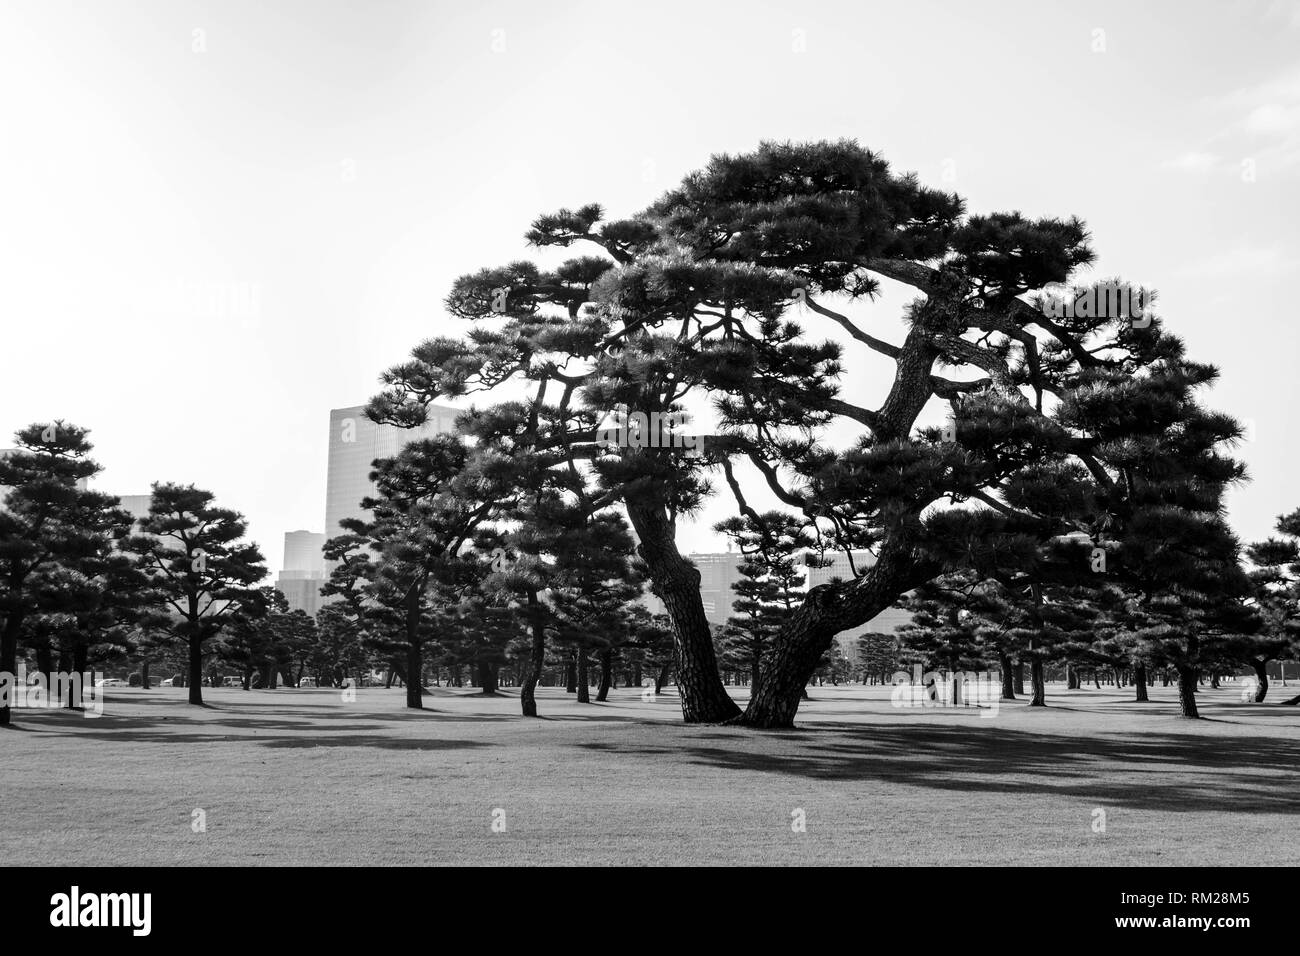 Japanese Black Pines on the grassy lawn of the Imperial Palace, Tokyo, Japan. The skyline of Tokyo can be seen in the background. Stock Photo